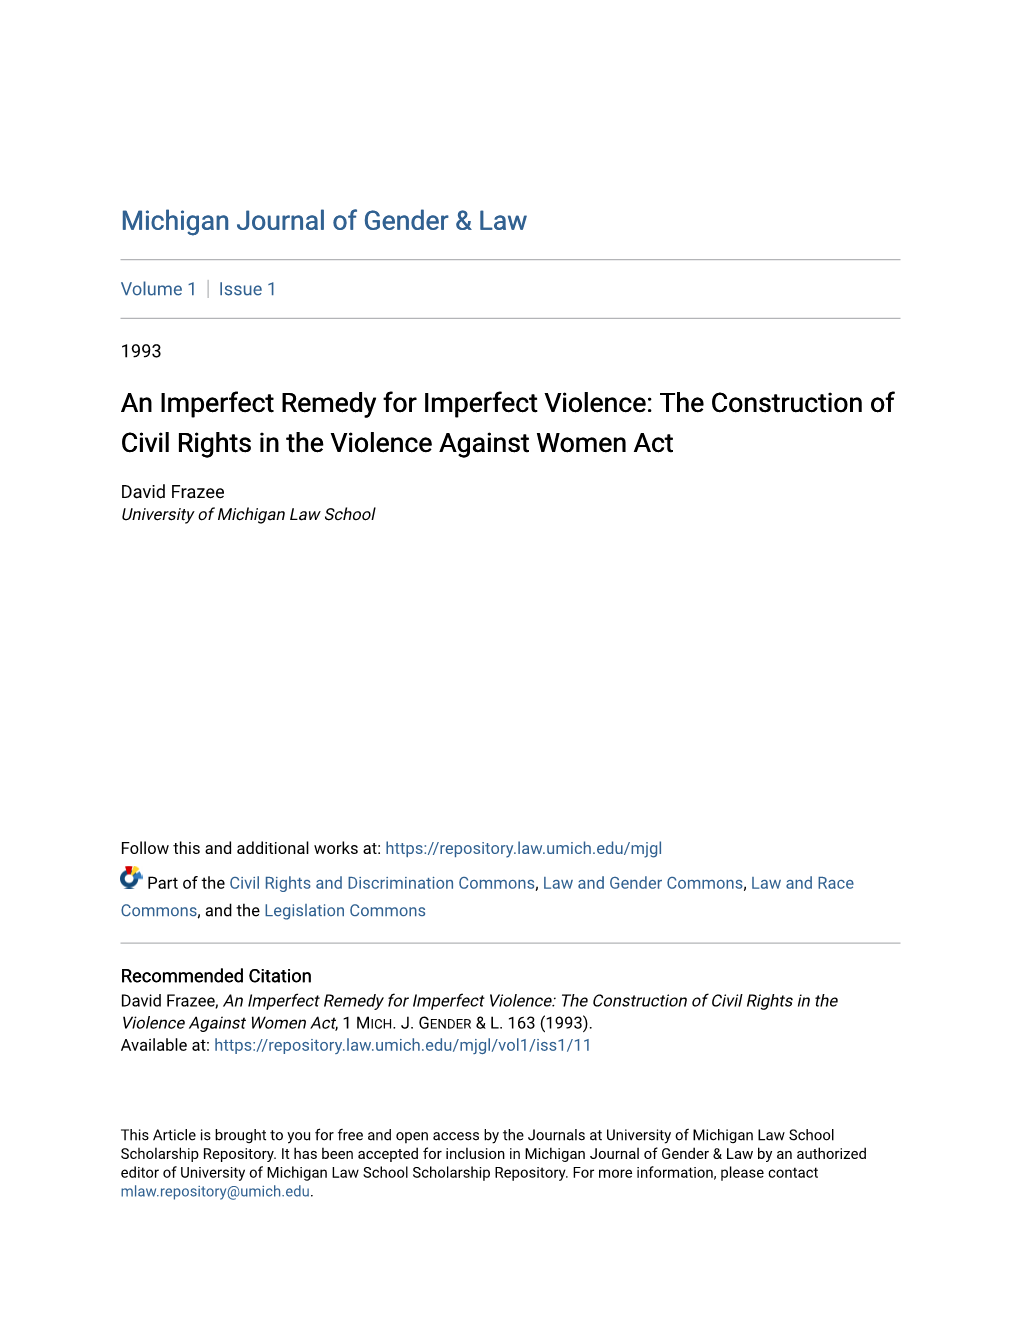 An Imperfect Remedy for Imperfect Violence: the Construction of Civil Rights in the Violence Against Women Act